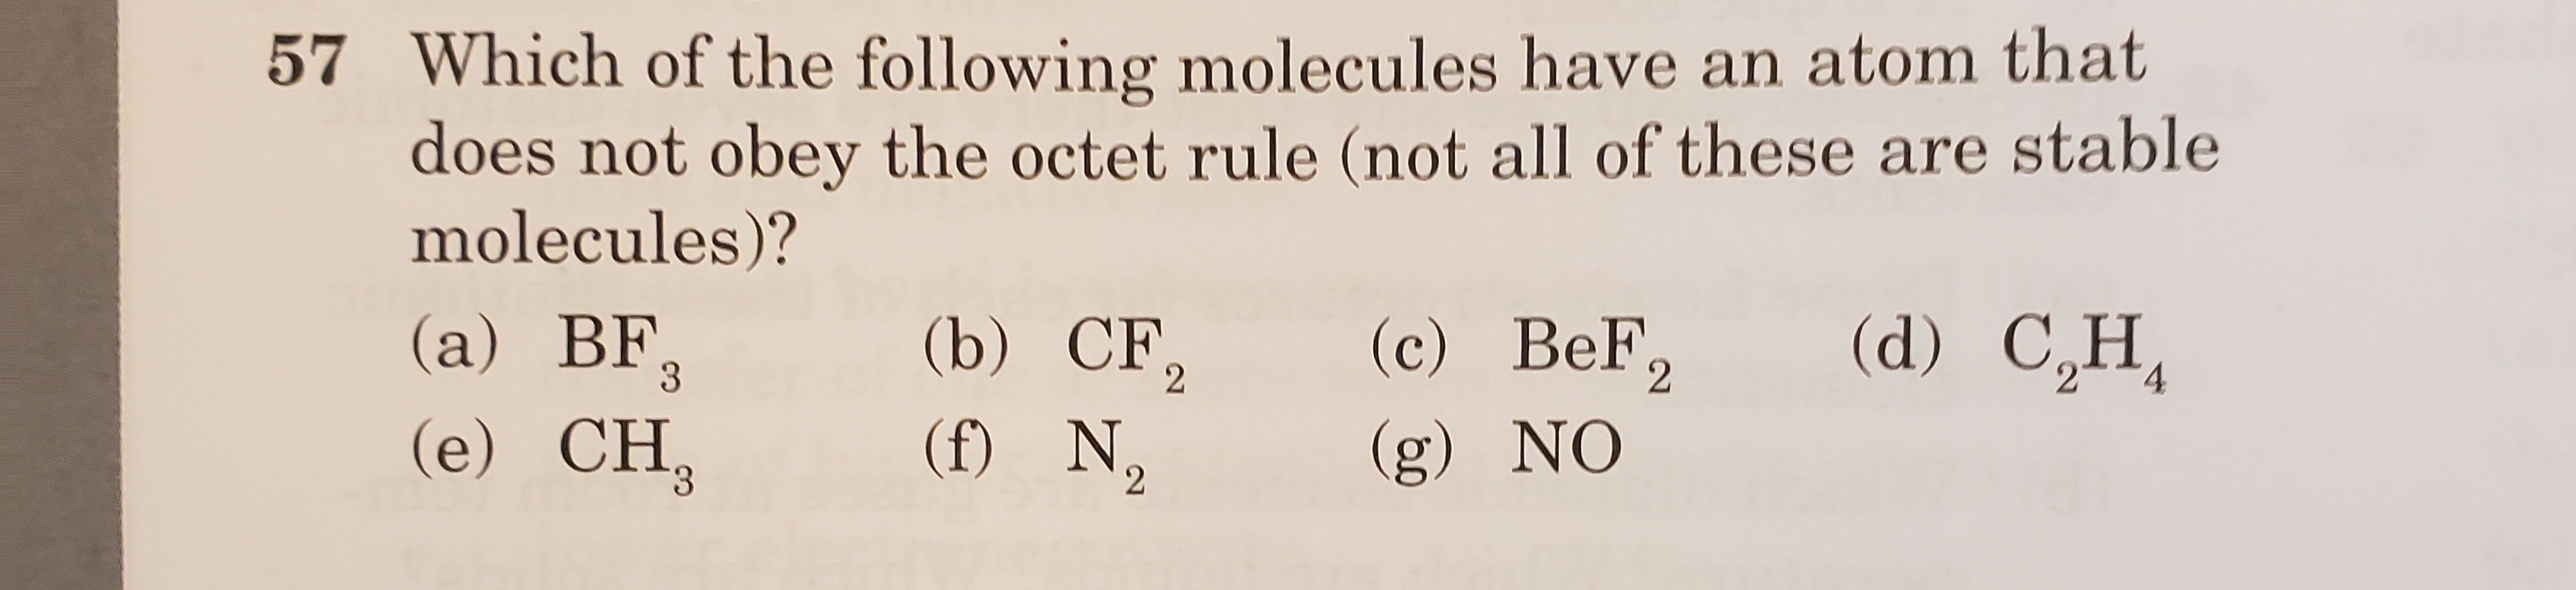 57 Which of the following molecules have an atom that
does not obey the octet rule (not all of these are stable
molecules)?
(c) BeF,
(d) C,H,
(b) CF,
(f) N2
(а) BF,
3.
2
(e) CH,
(g) NO
